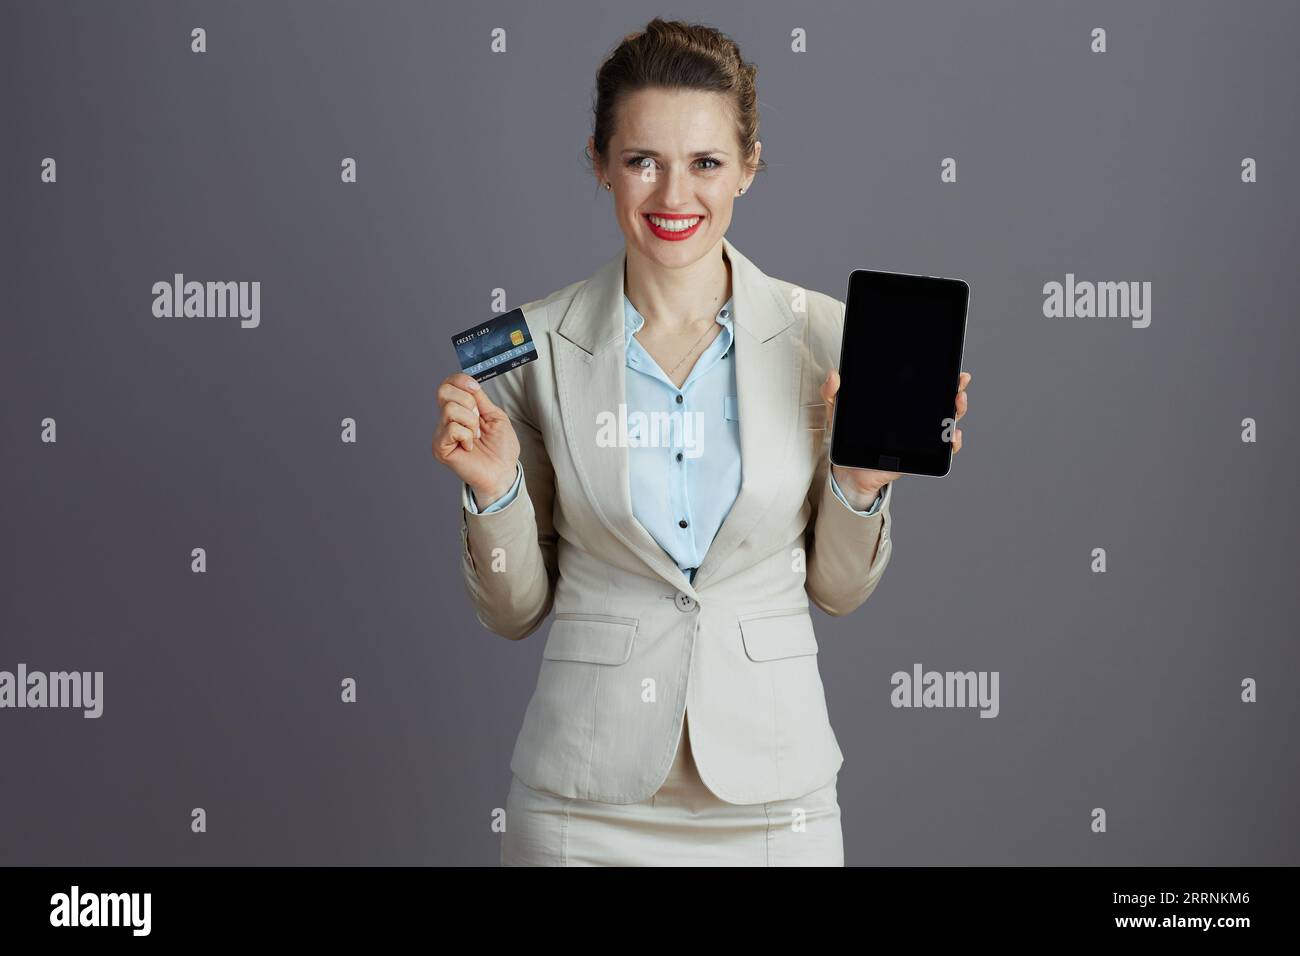 smiling modern female employee in a light business suit with digital tablet and credit card isolated on grey background. Stock Photo